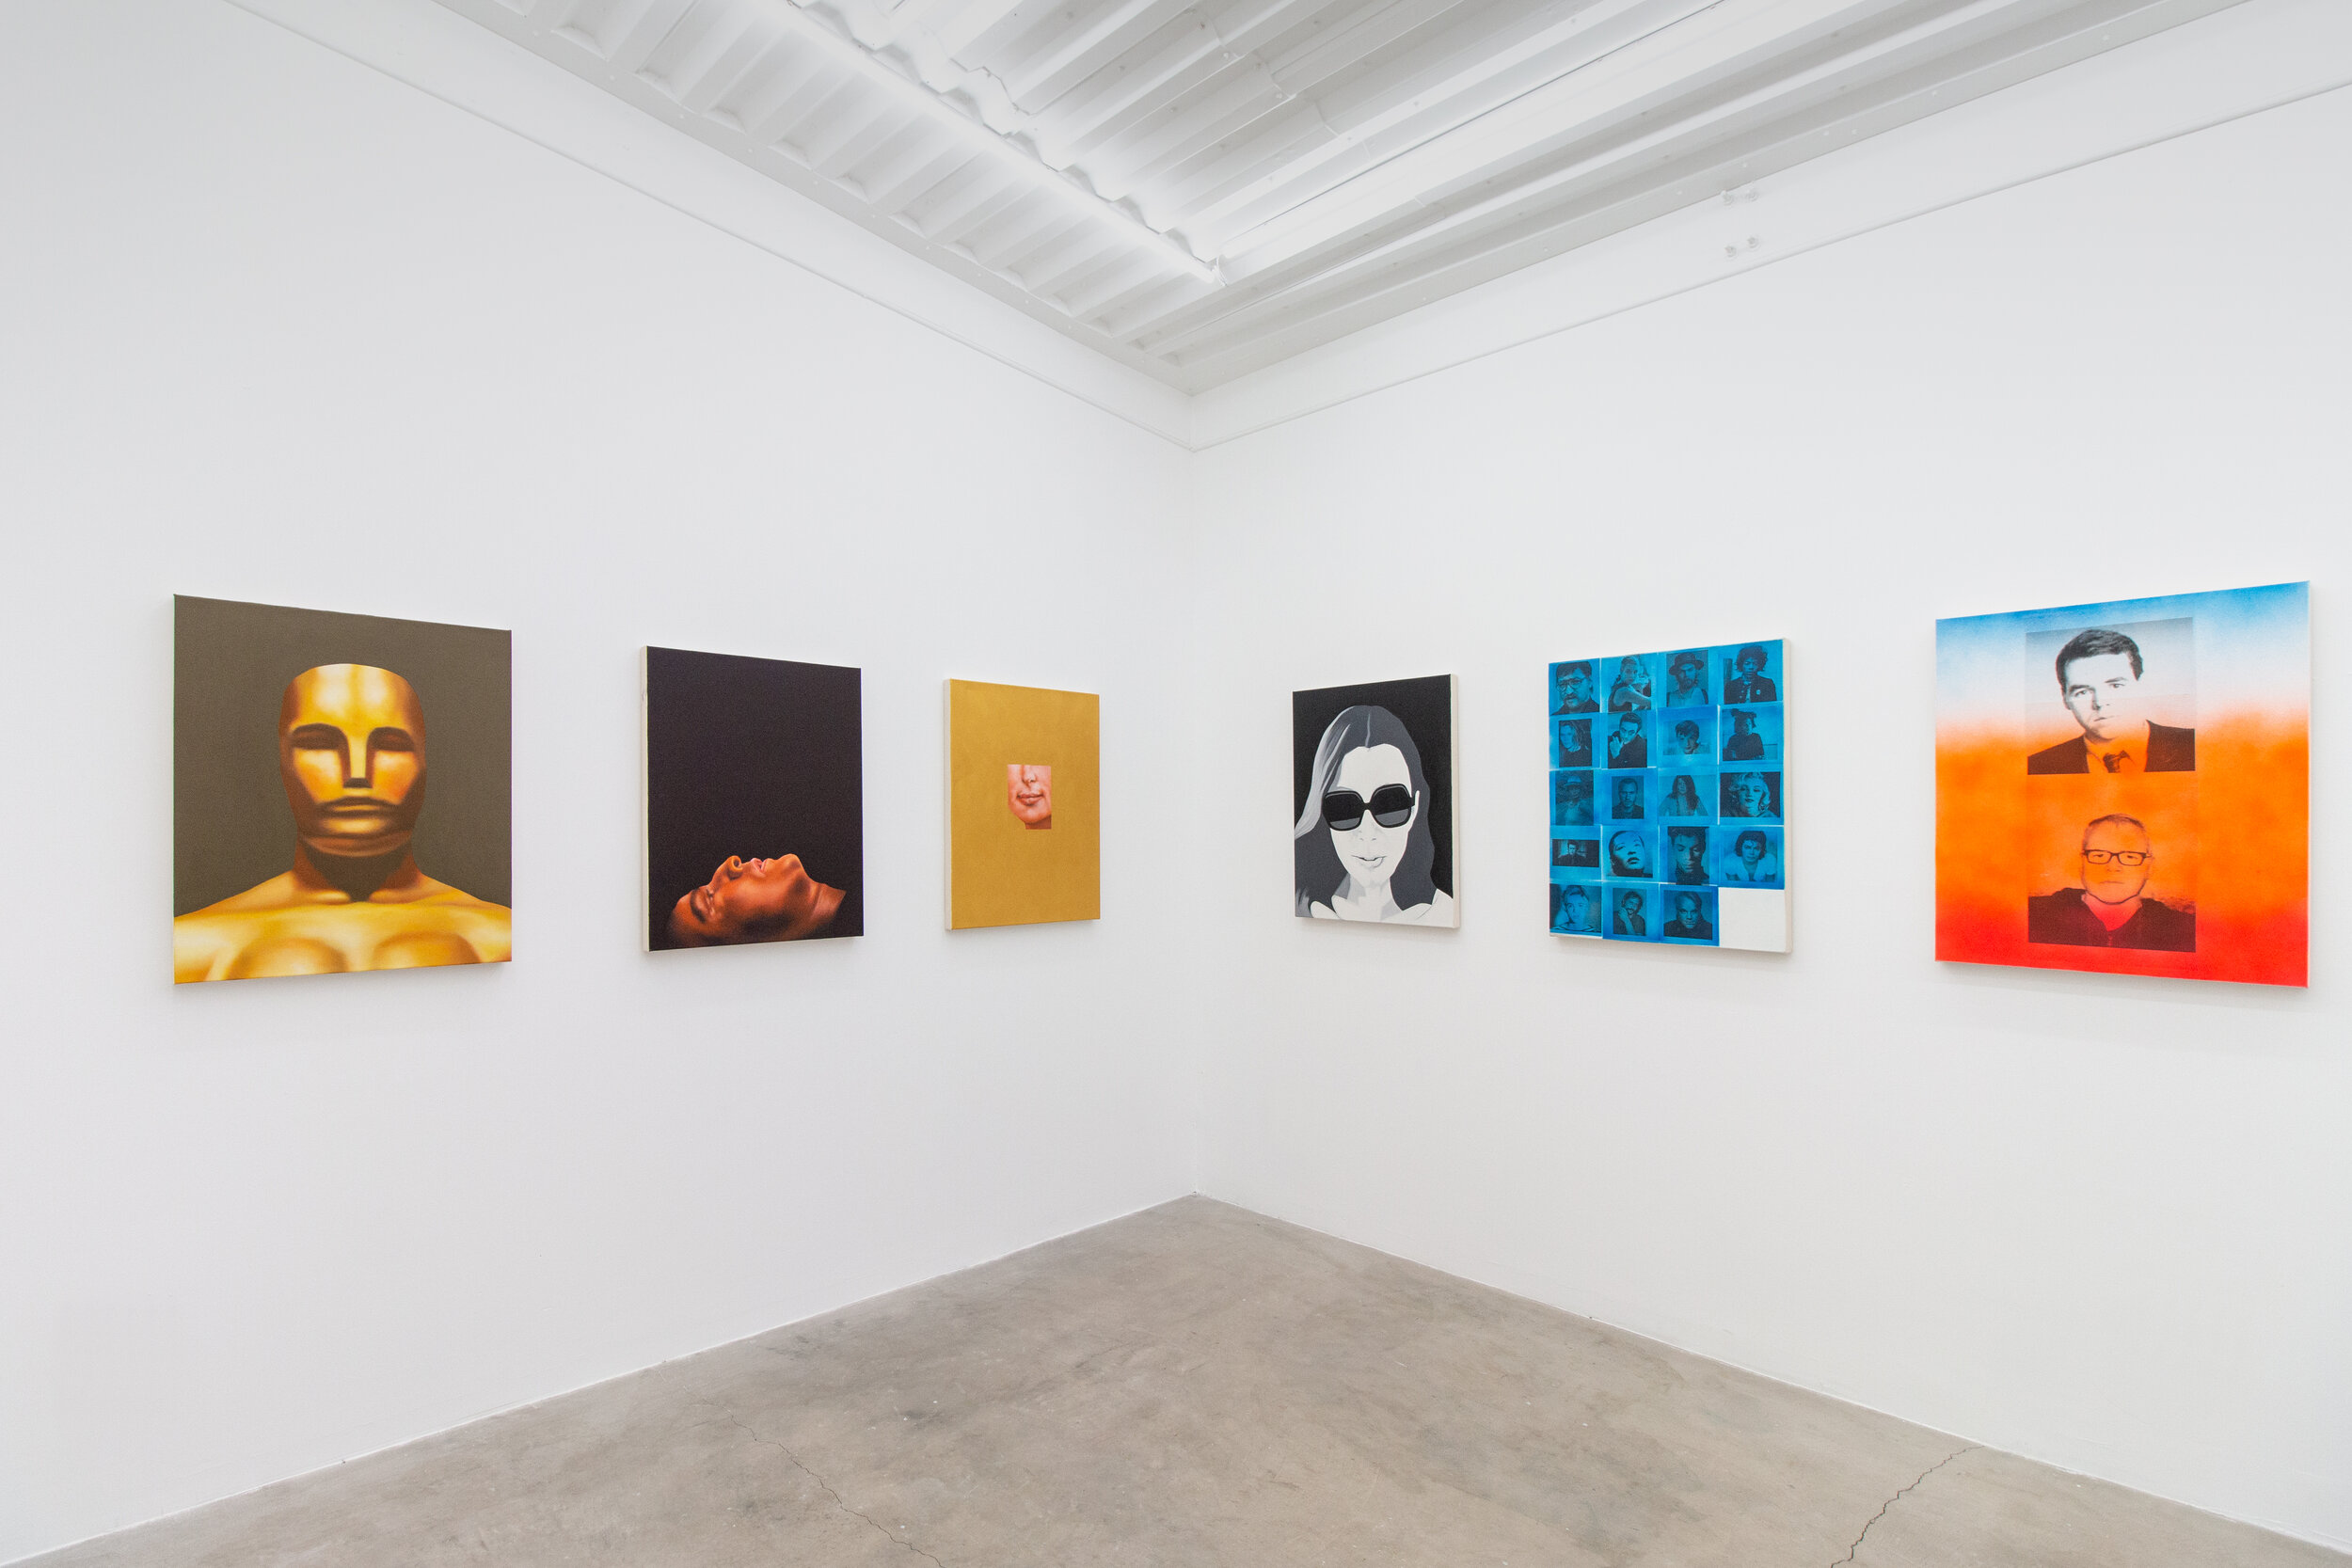 Michael St. John, These Days (installation view at De Boer)